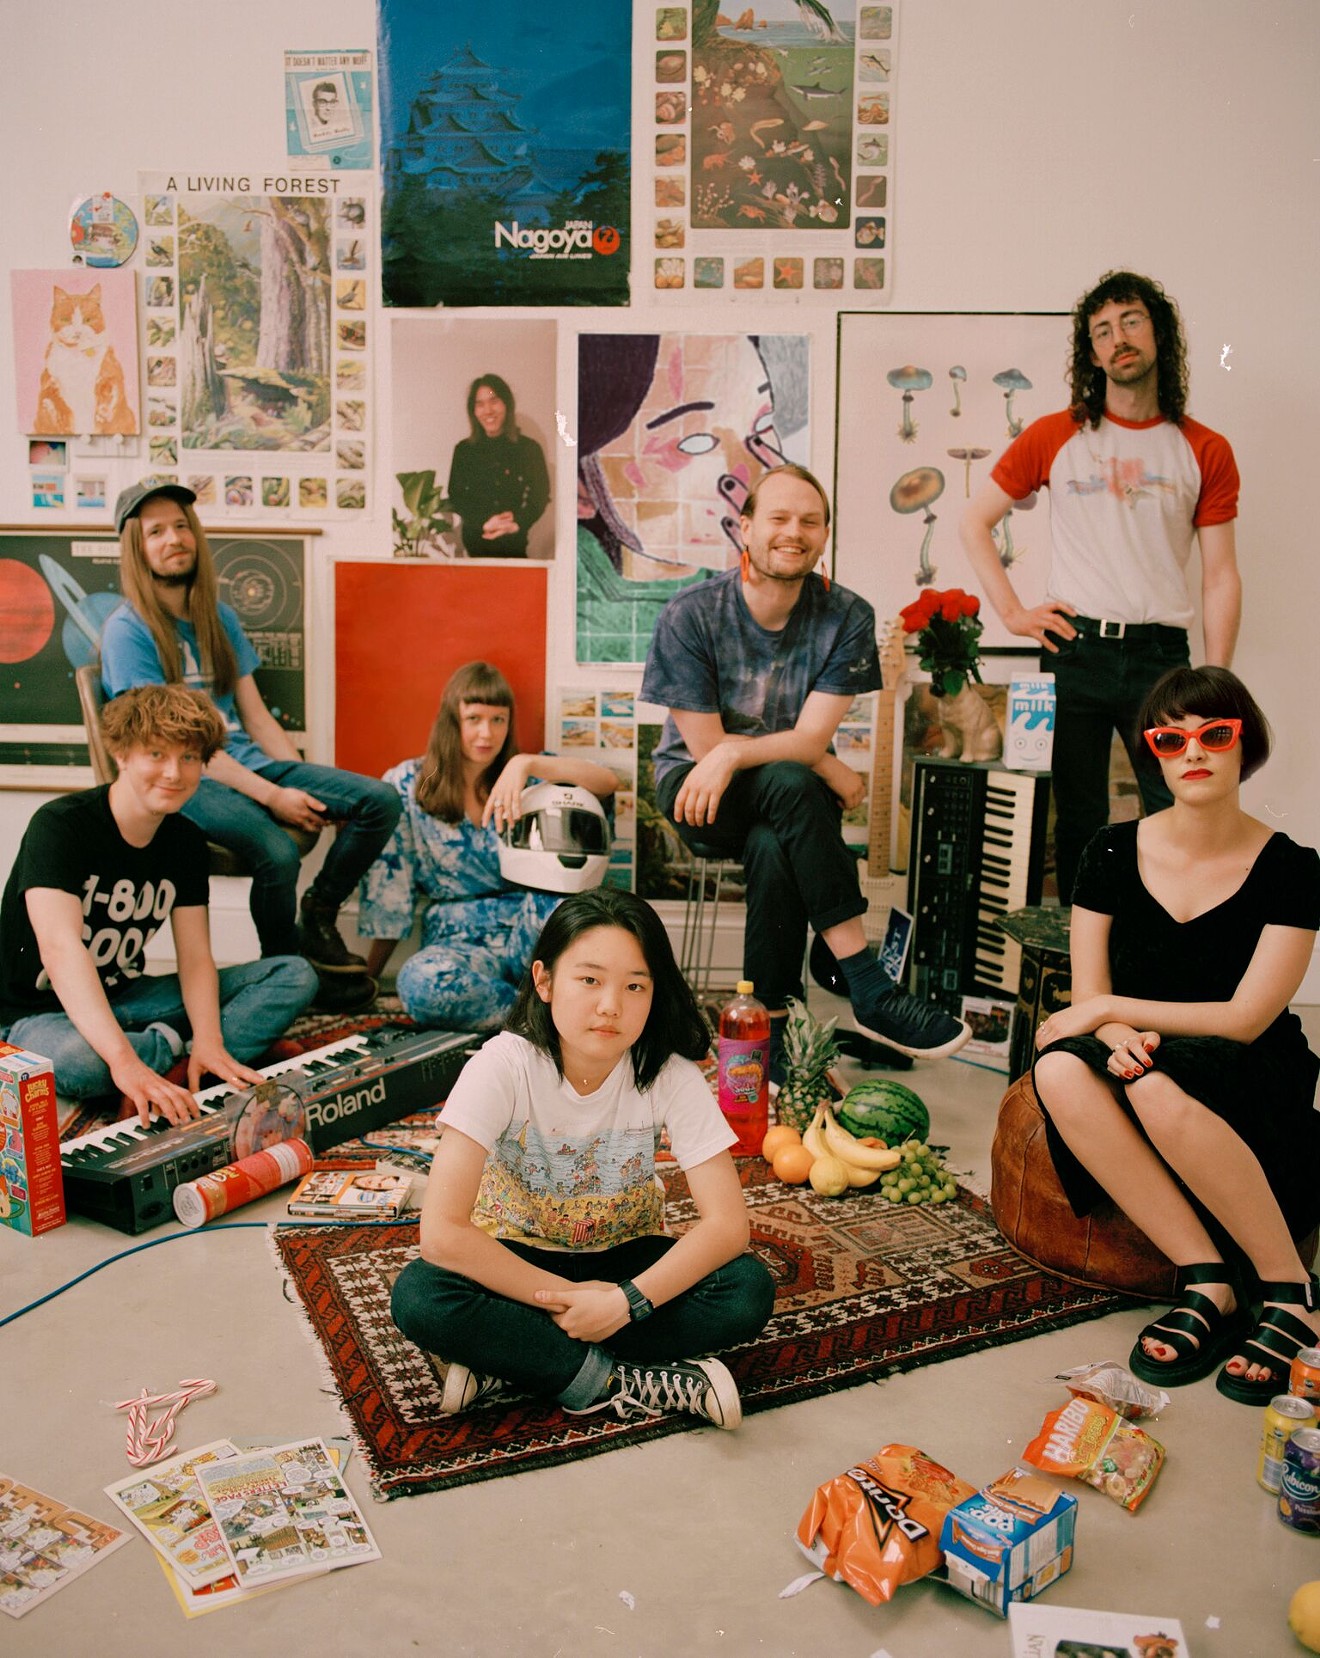 Superorganism comes to Dallas on Sept. 17.